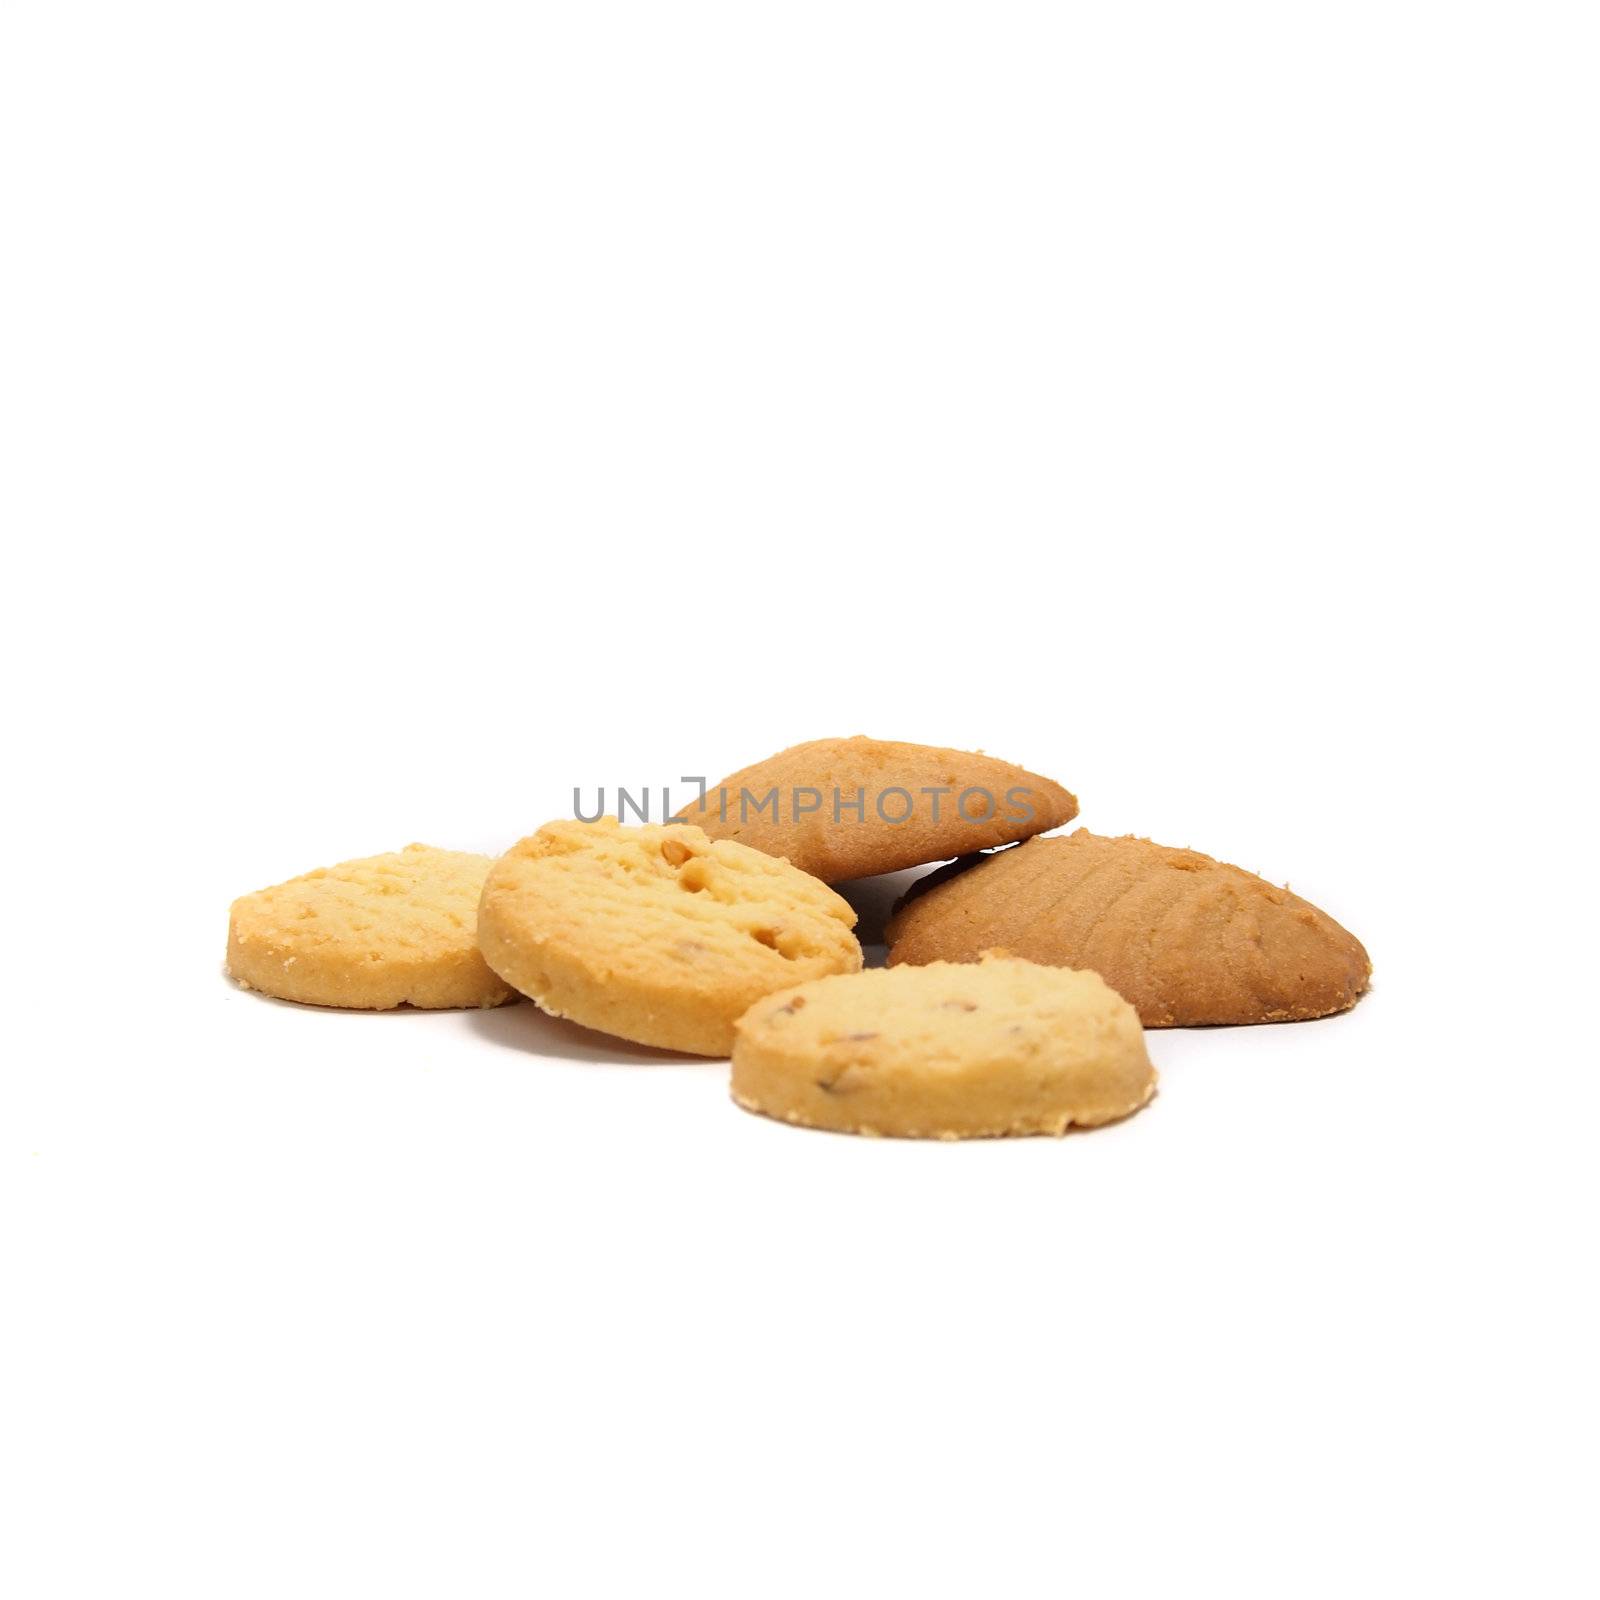 Some cookies isolated on a white background by siraanamwong